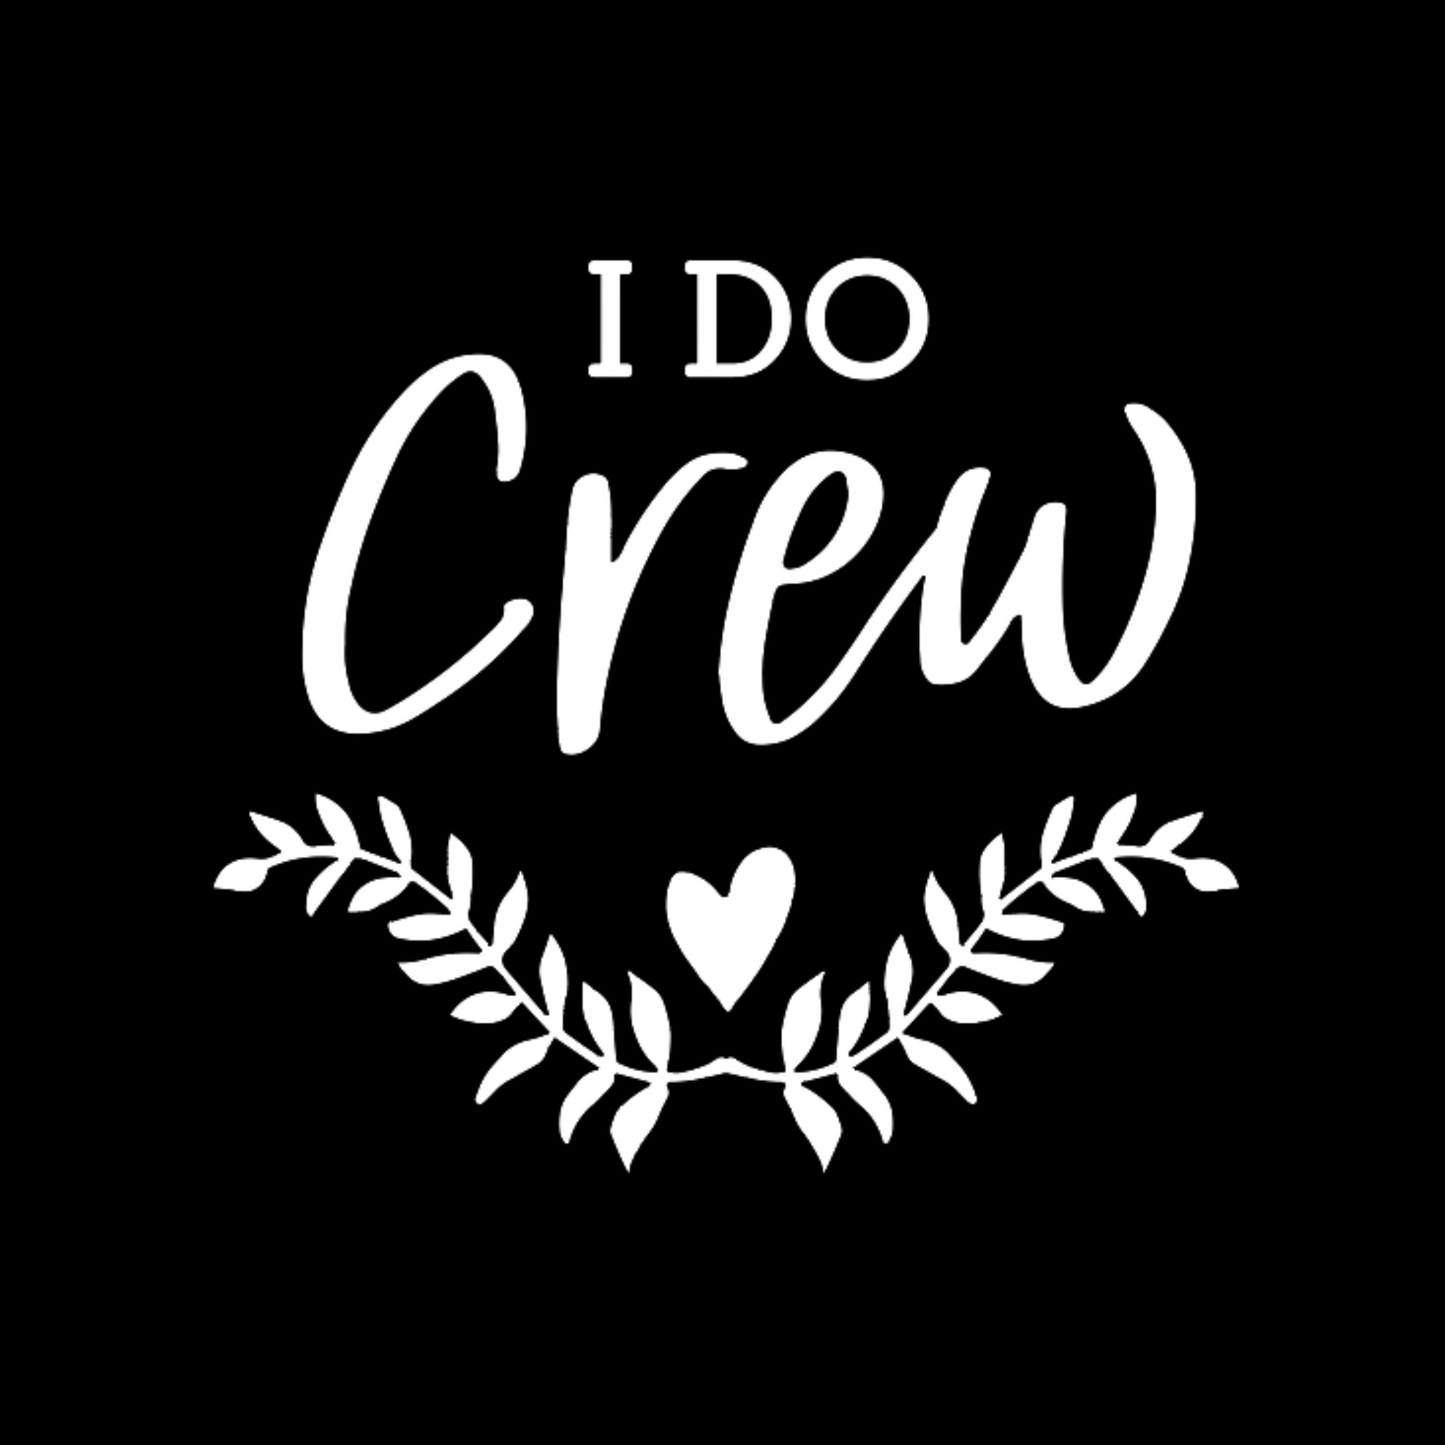 I Do Crew T-shirt I'm black. The front of the shirt has the saying "I do crew" on it with a small leafy garland below it with a heart in the middle. The design is in white. This is an image of the design alone in white on a black background.